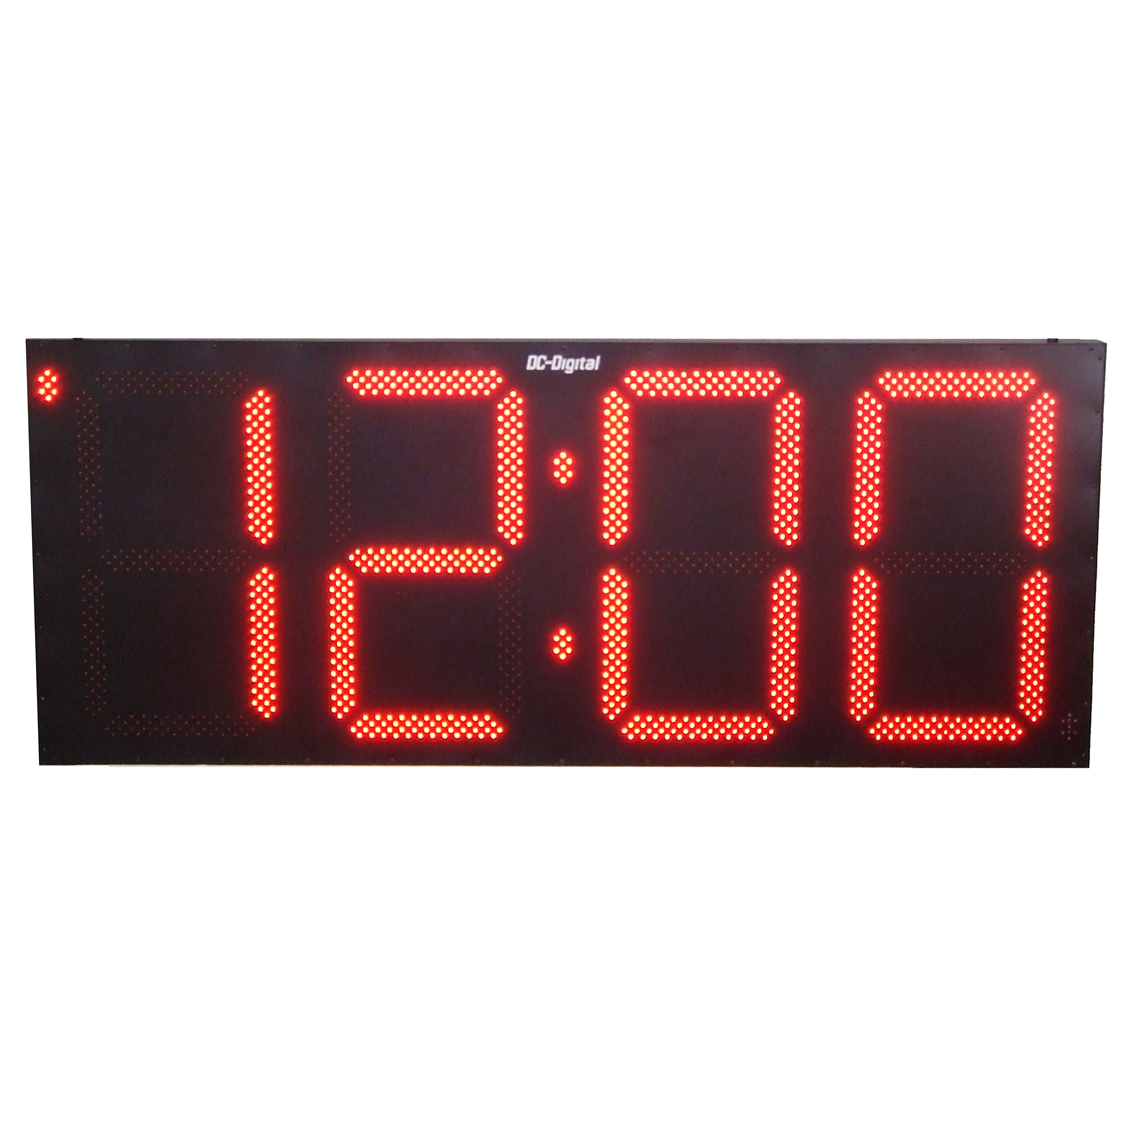 (DC-300N) "Biggest Outdoor Network Clock in the Industry" Network NTP Synchronized LED Digital Clock, 30 Inch high Digits, 1500 feet viewing distance (OUTDOOR)